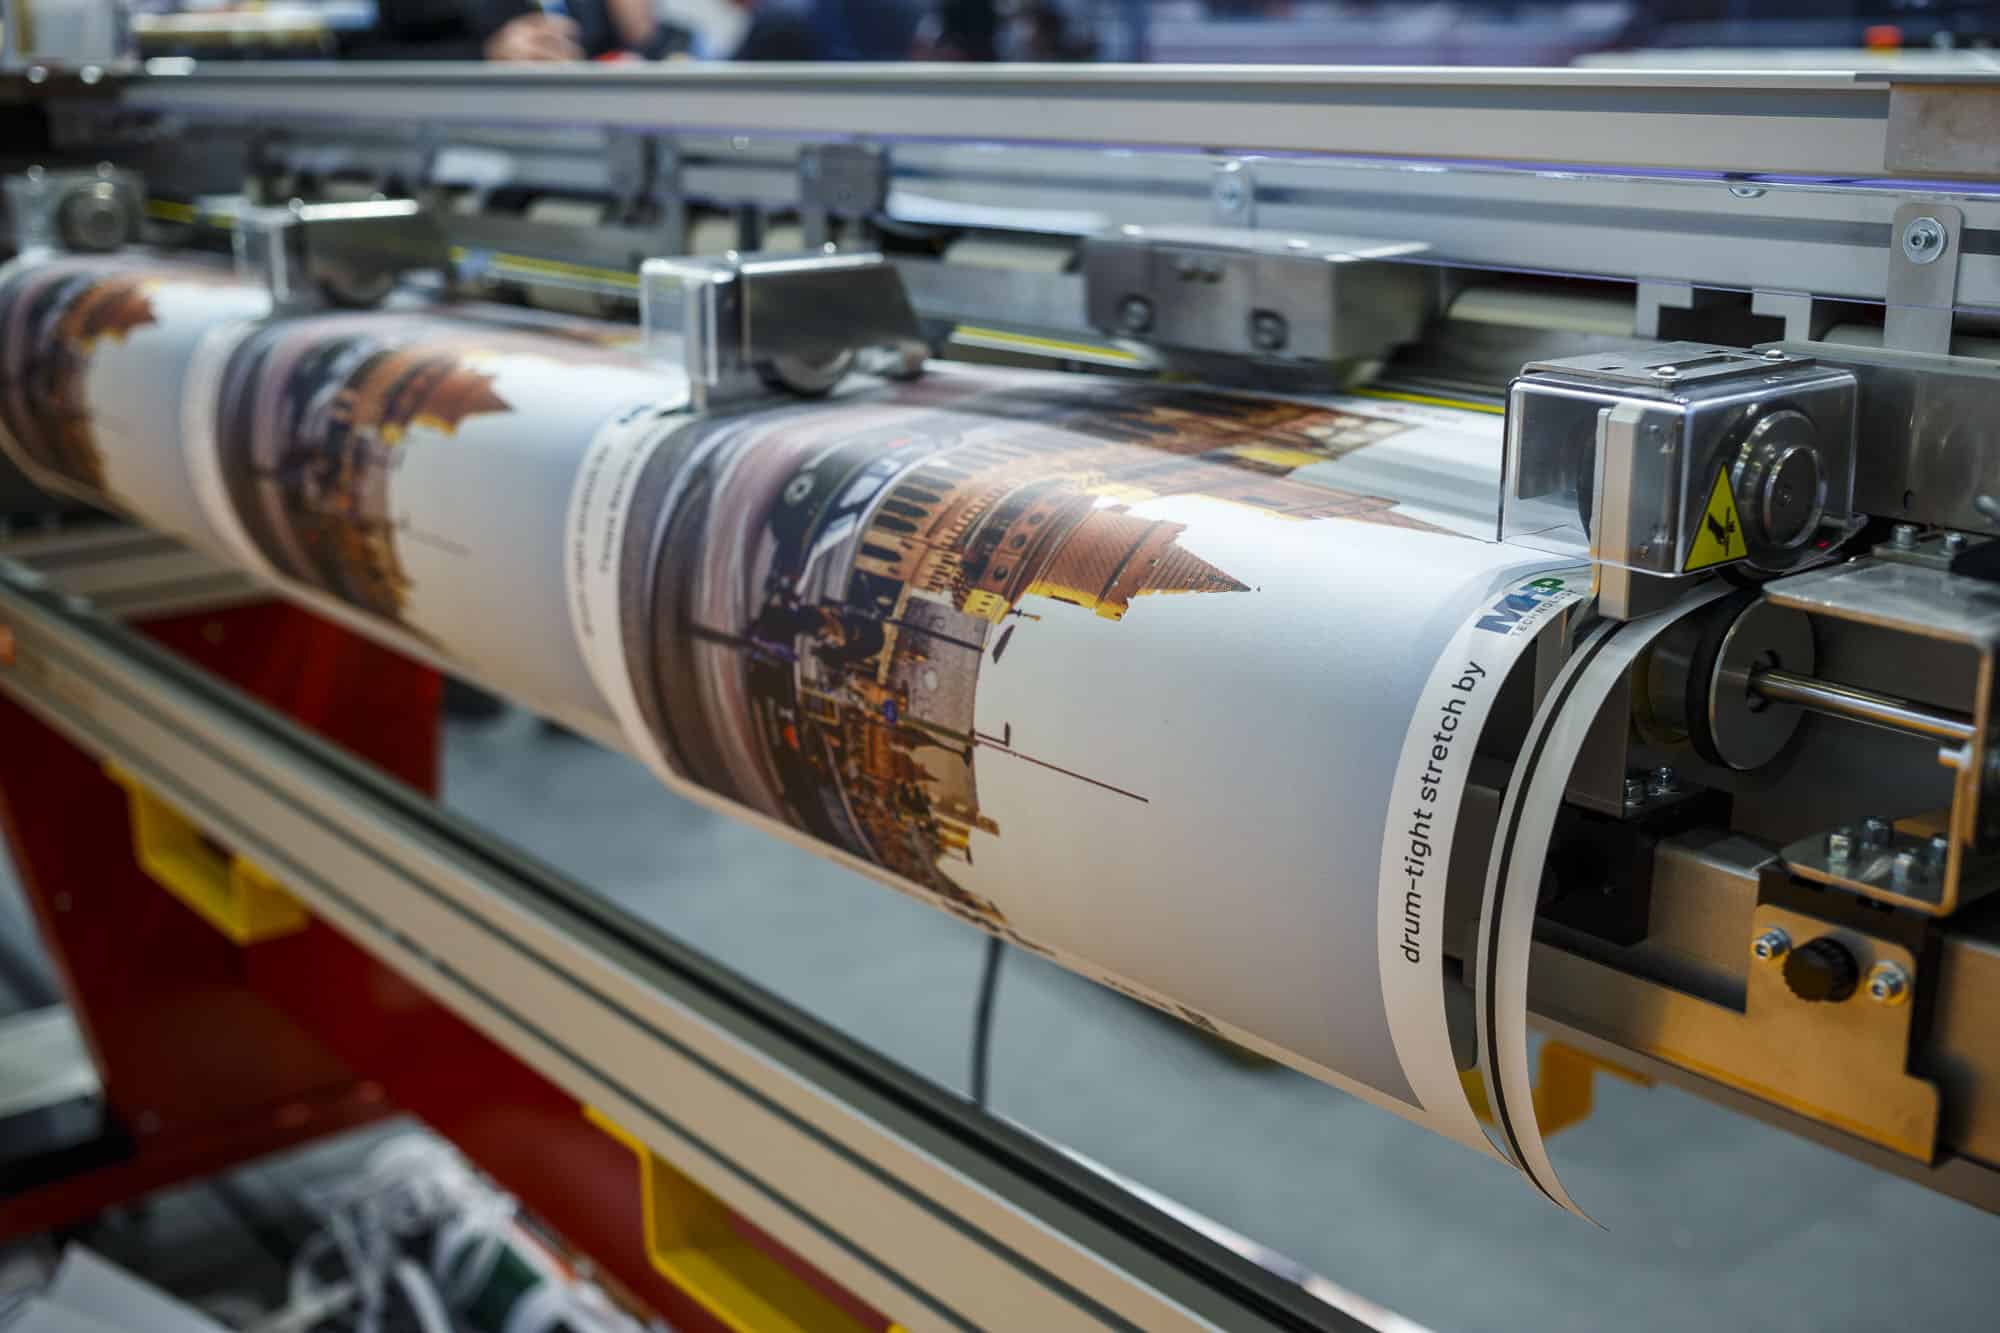 Canvas cut at our cooperation partners Fotoba at Fespa 2022